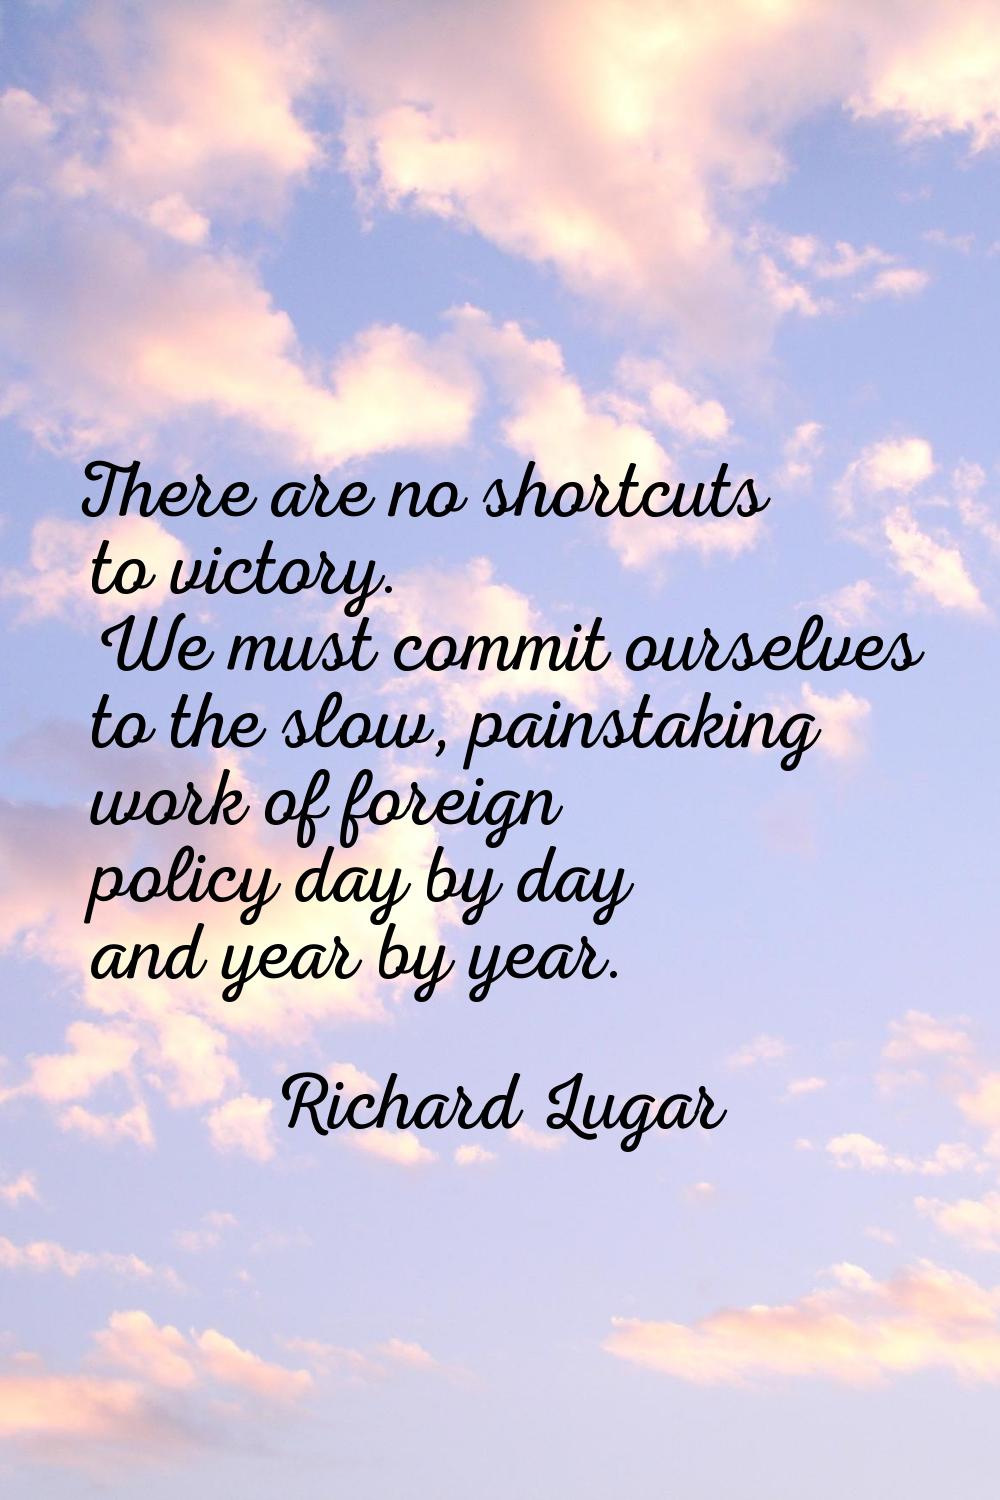 There are no shortcuts to victory. We must commit ourselves to the slow, painstaking work of foreig